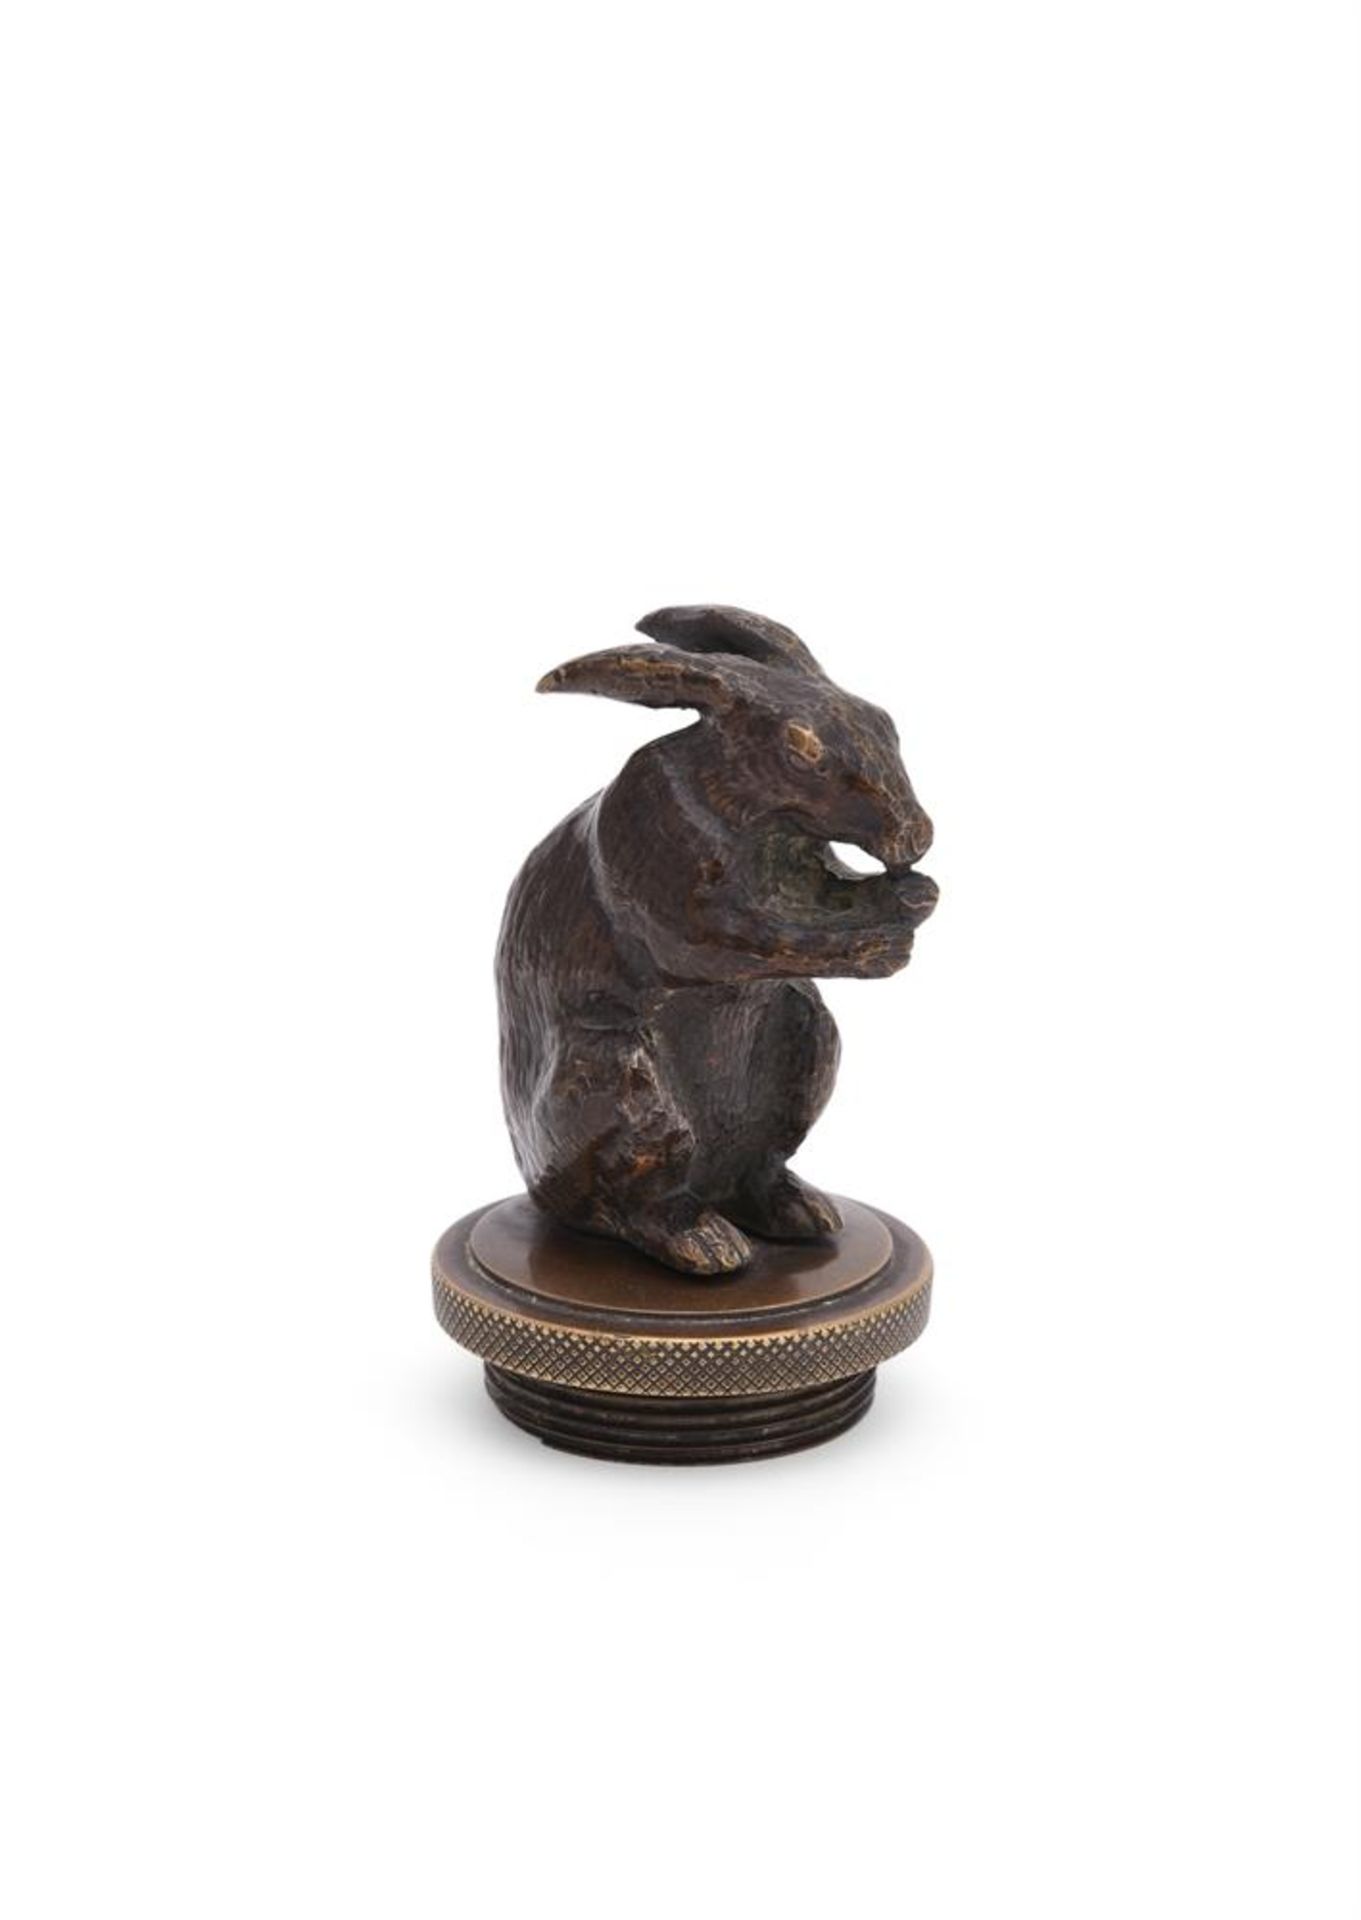 FRENCH SCHOOL, A BRONZE RADIATOR CAP MODELLED AS A STANDING RABBIT - Image 2 of 4